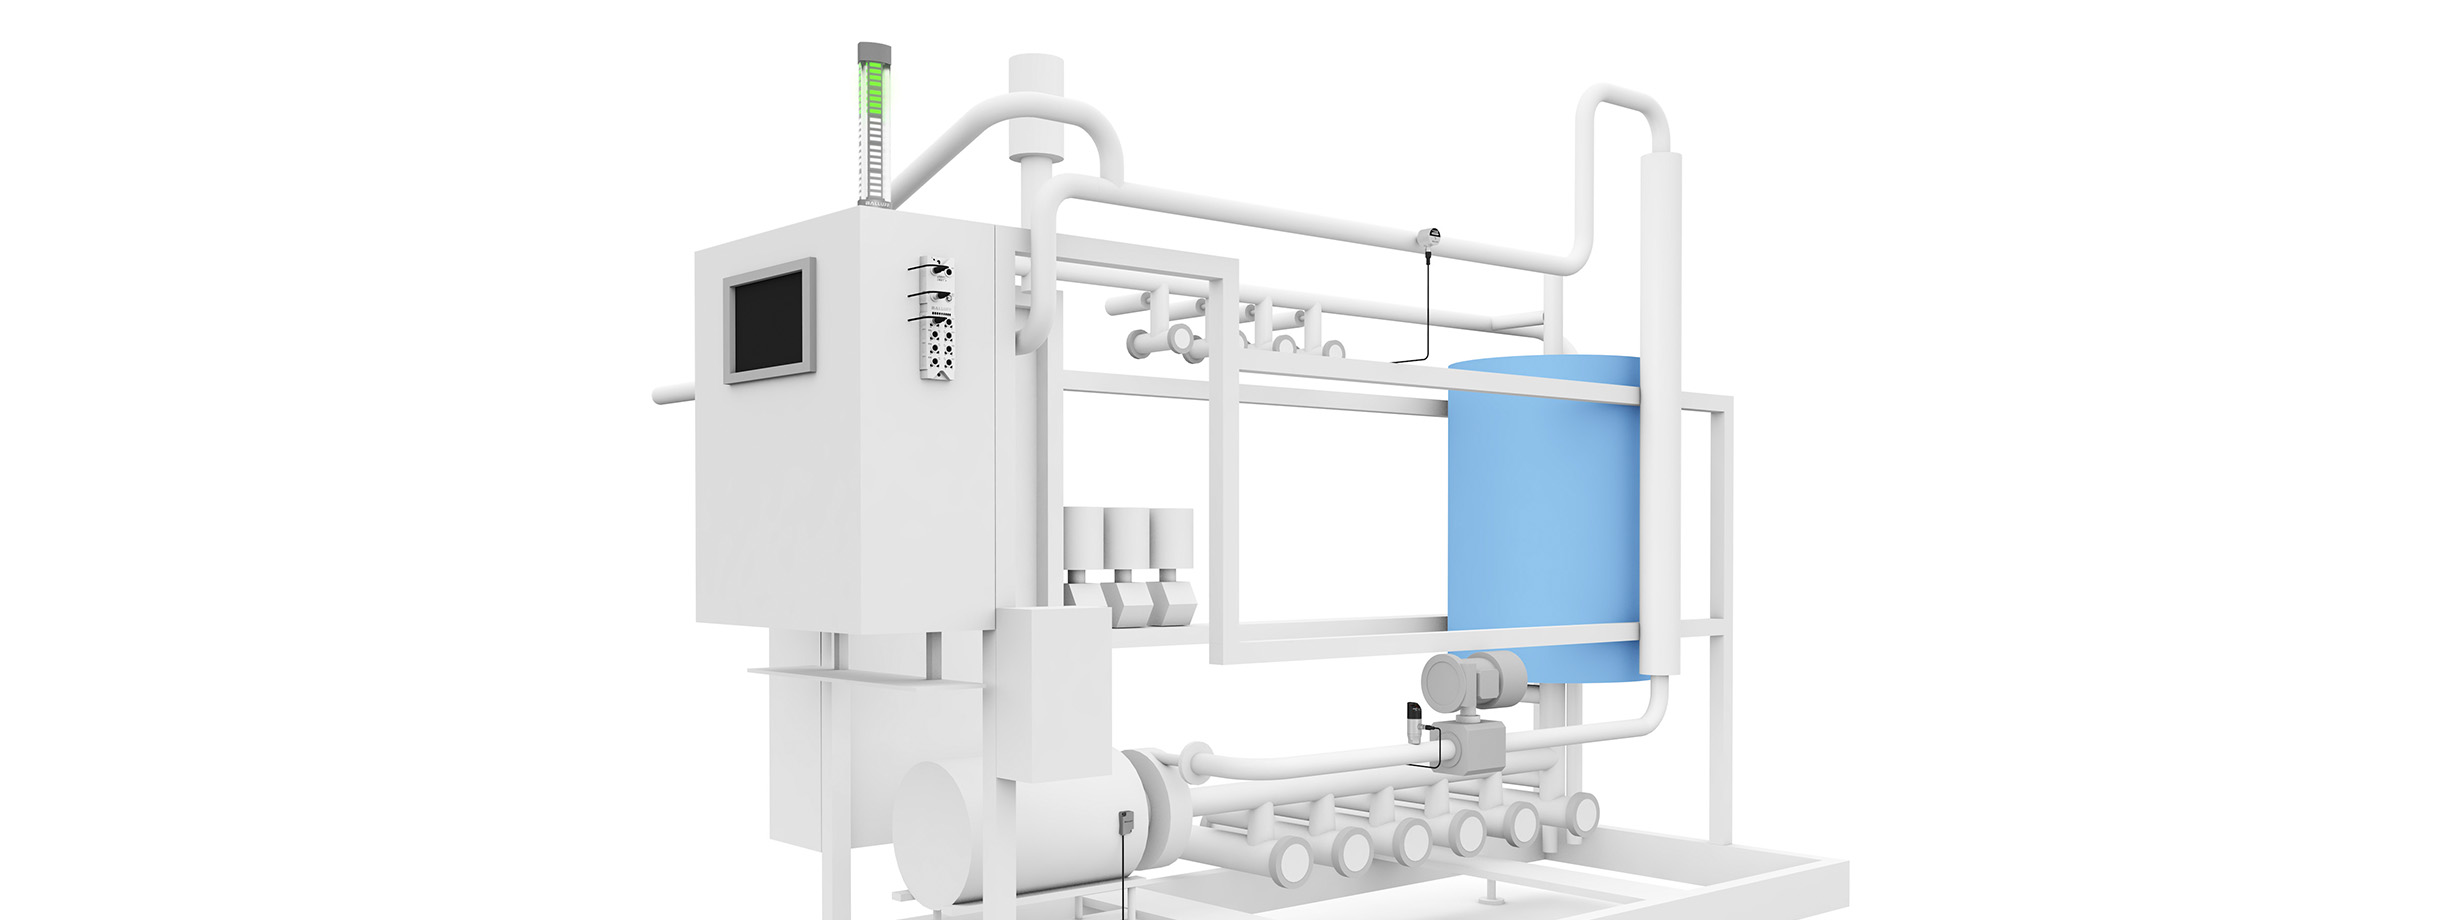 Smart sensor integration for automated cleaning in beverage production image